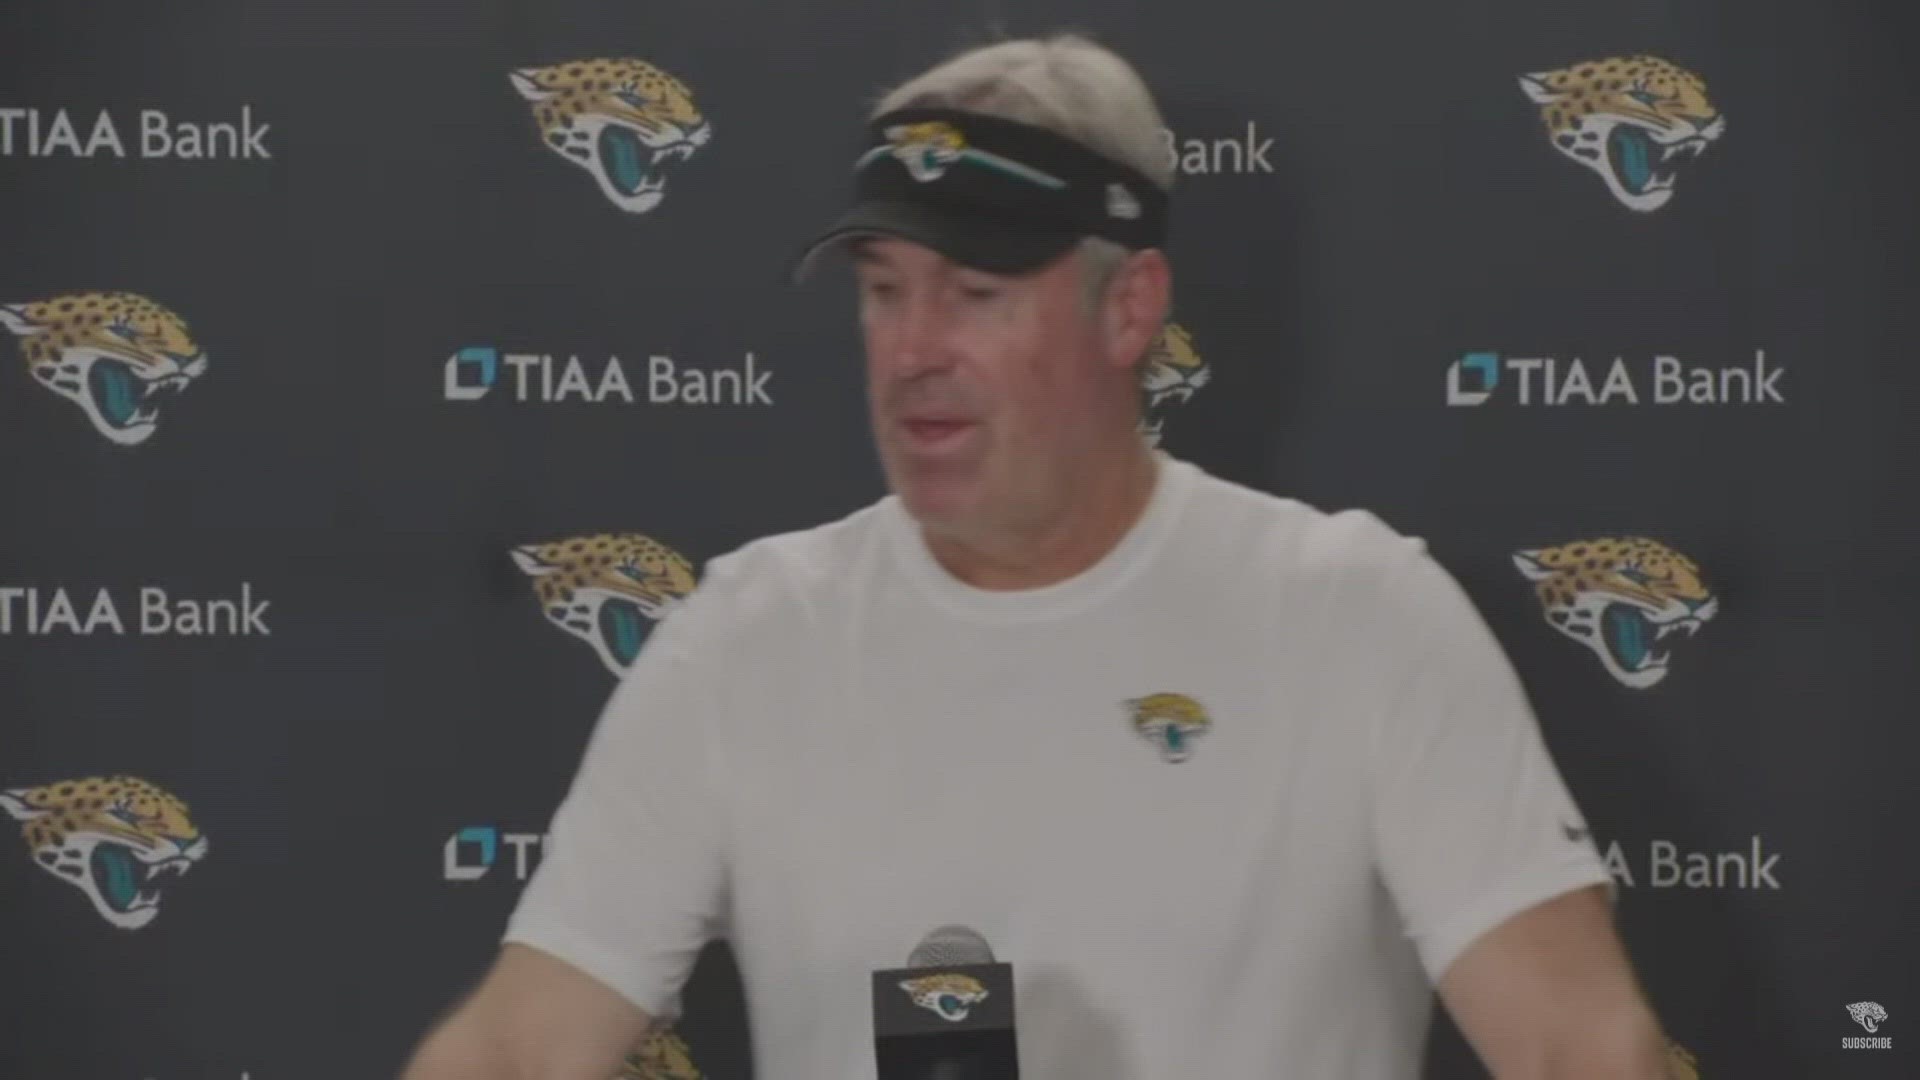 Jaguars beat Lions 25-7 in preseason matchup featuring backups on